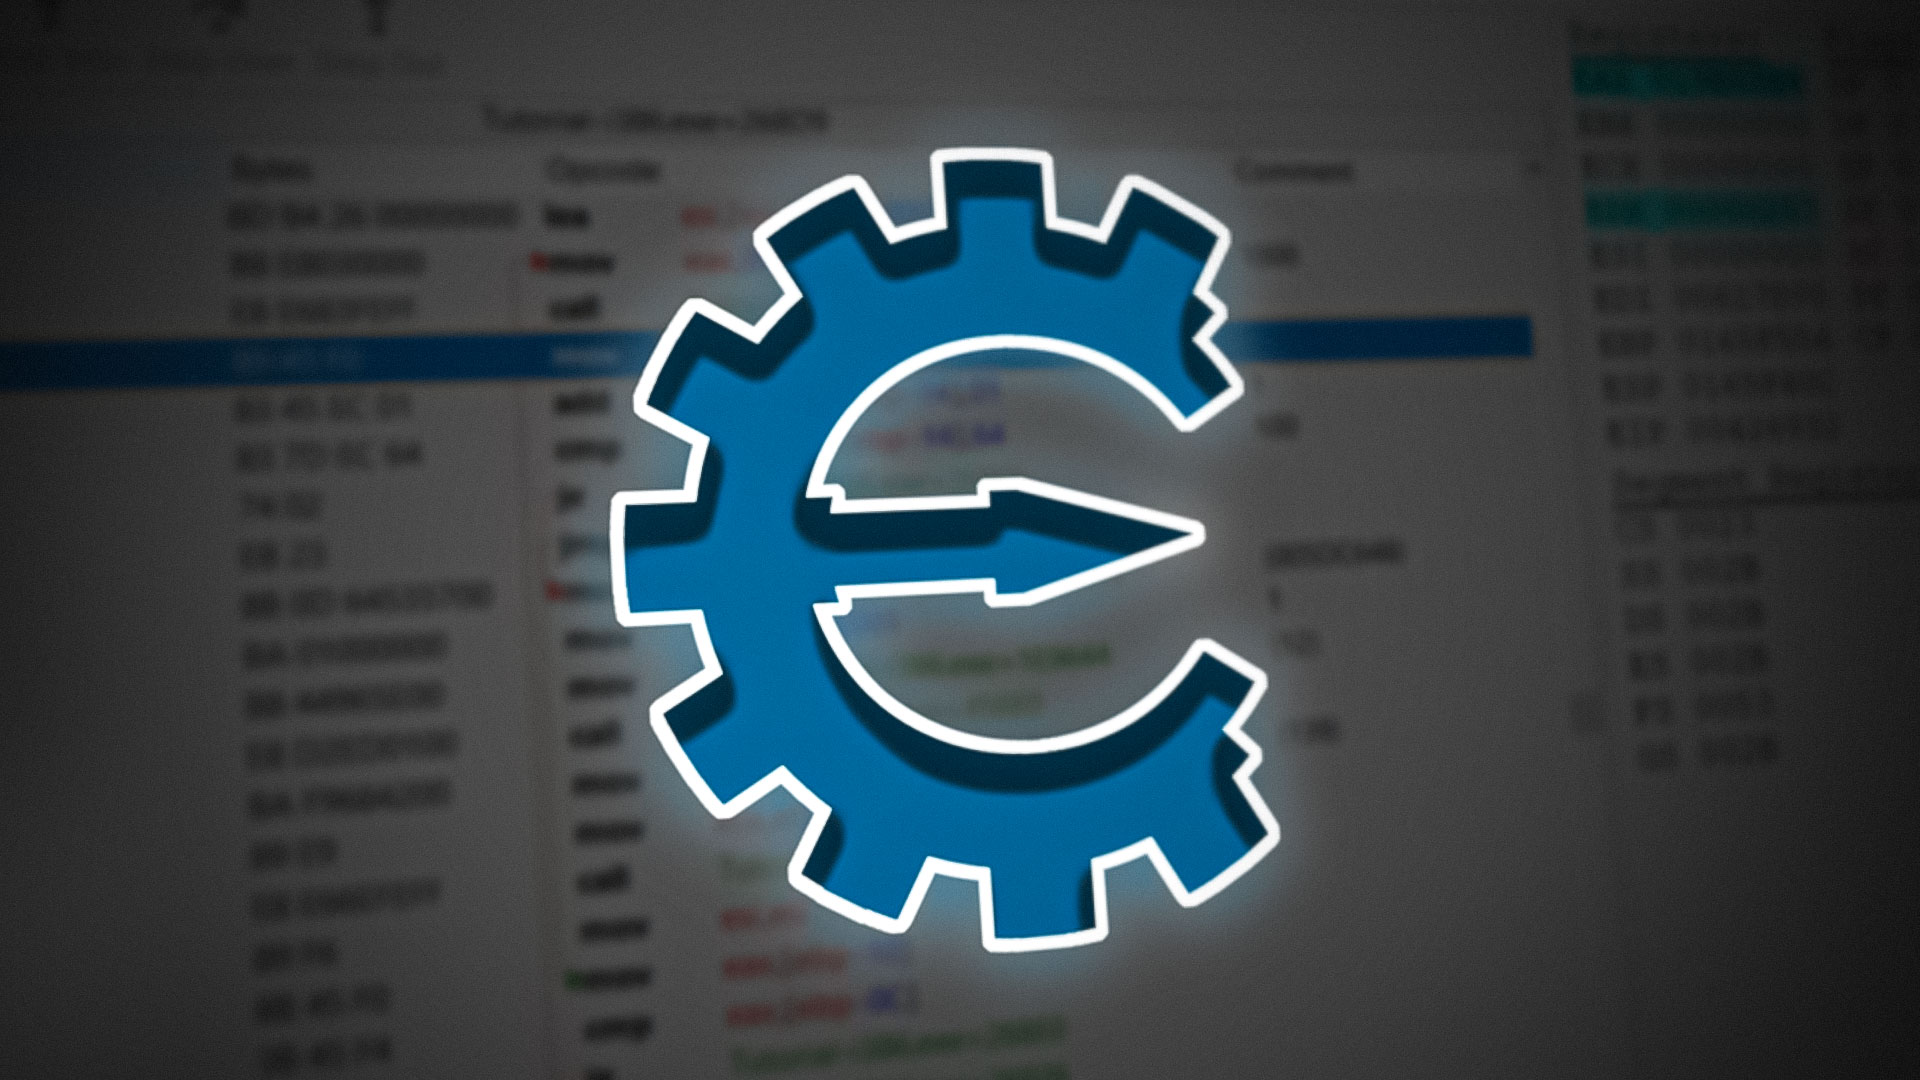 GAME TOOL Cheat Engine v.7.5 - download